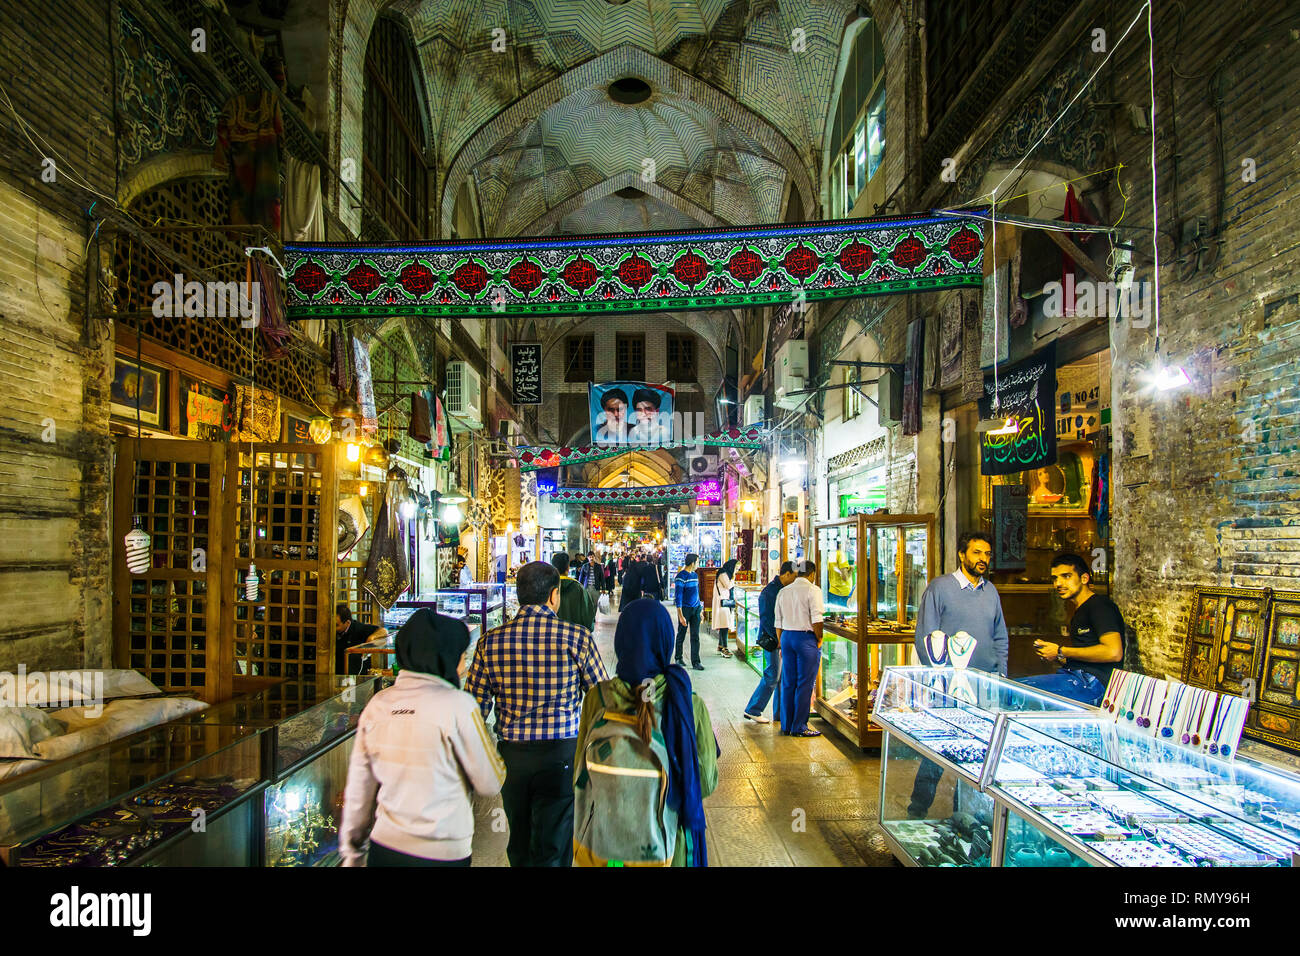 Isfahan, Iran on 31th October 2016: View on People looking onr local products in the Souk of the old town Stock Photo